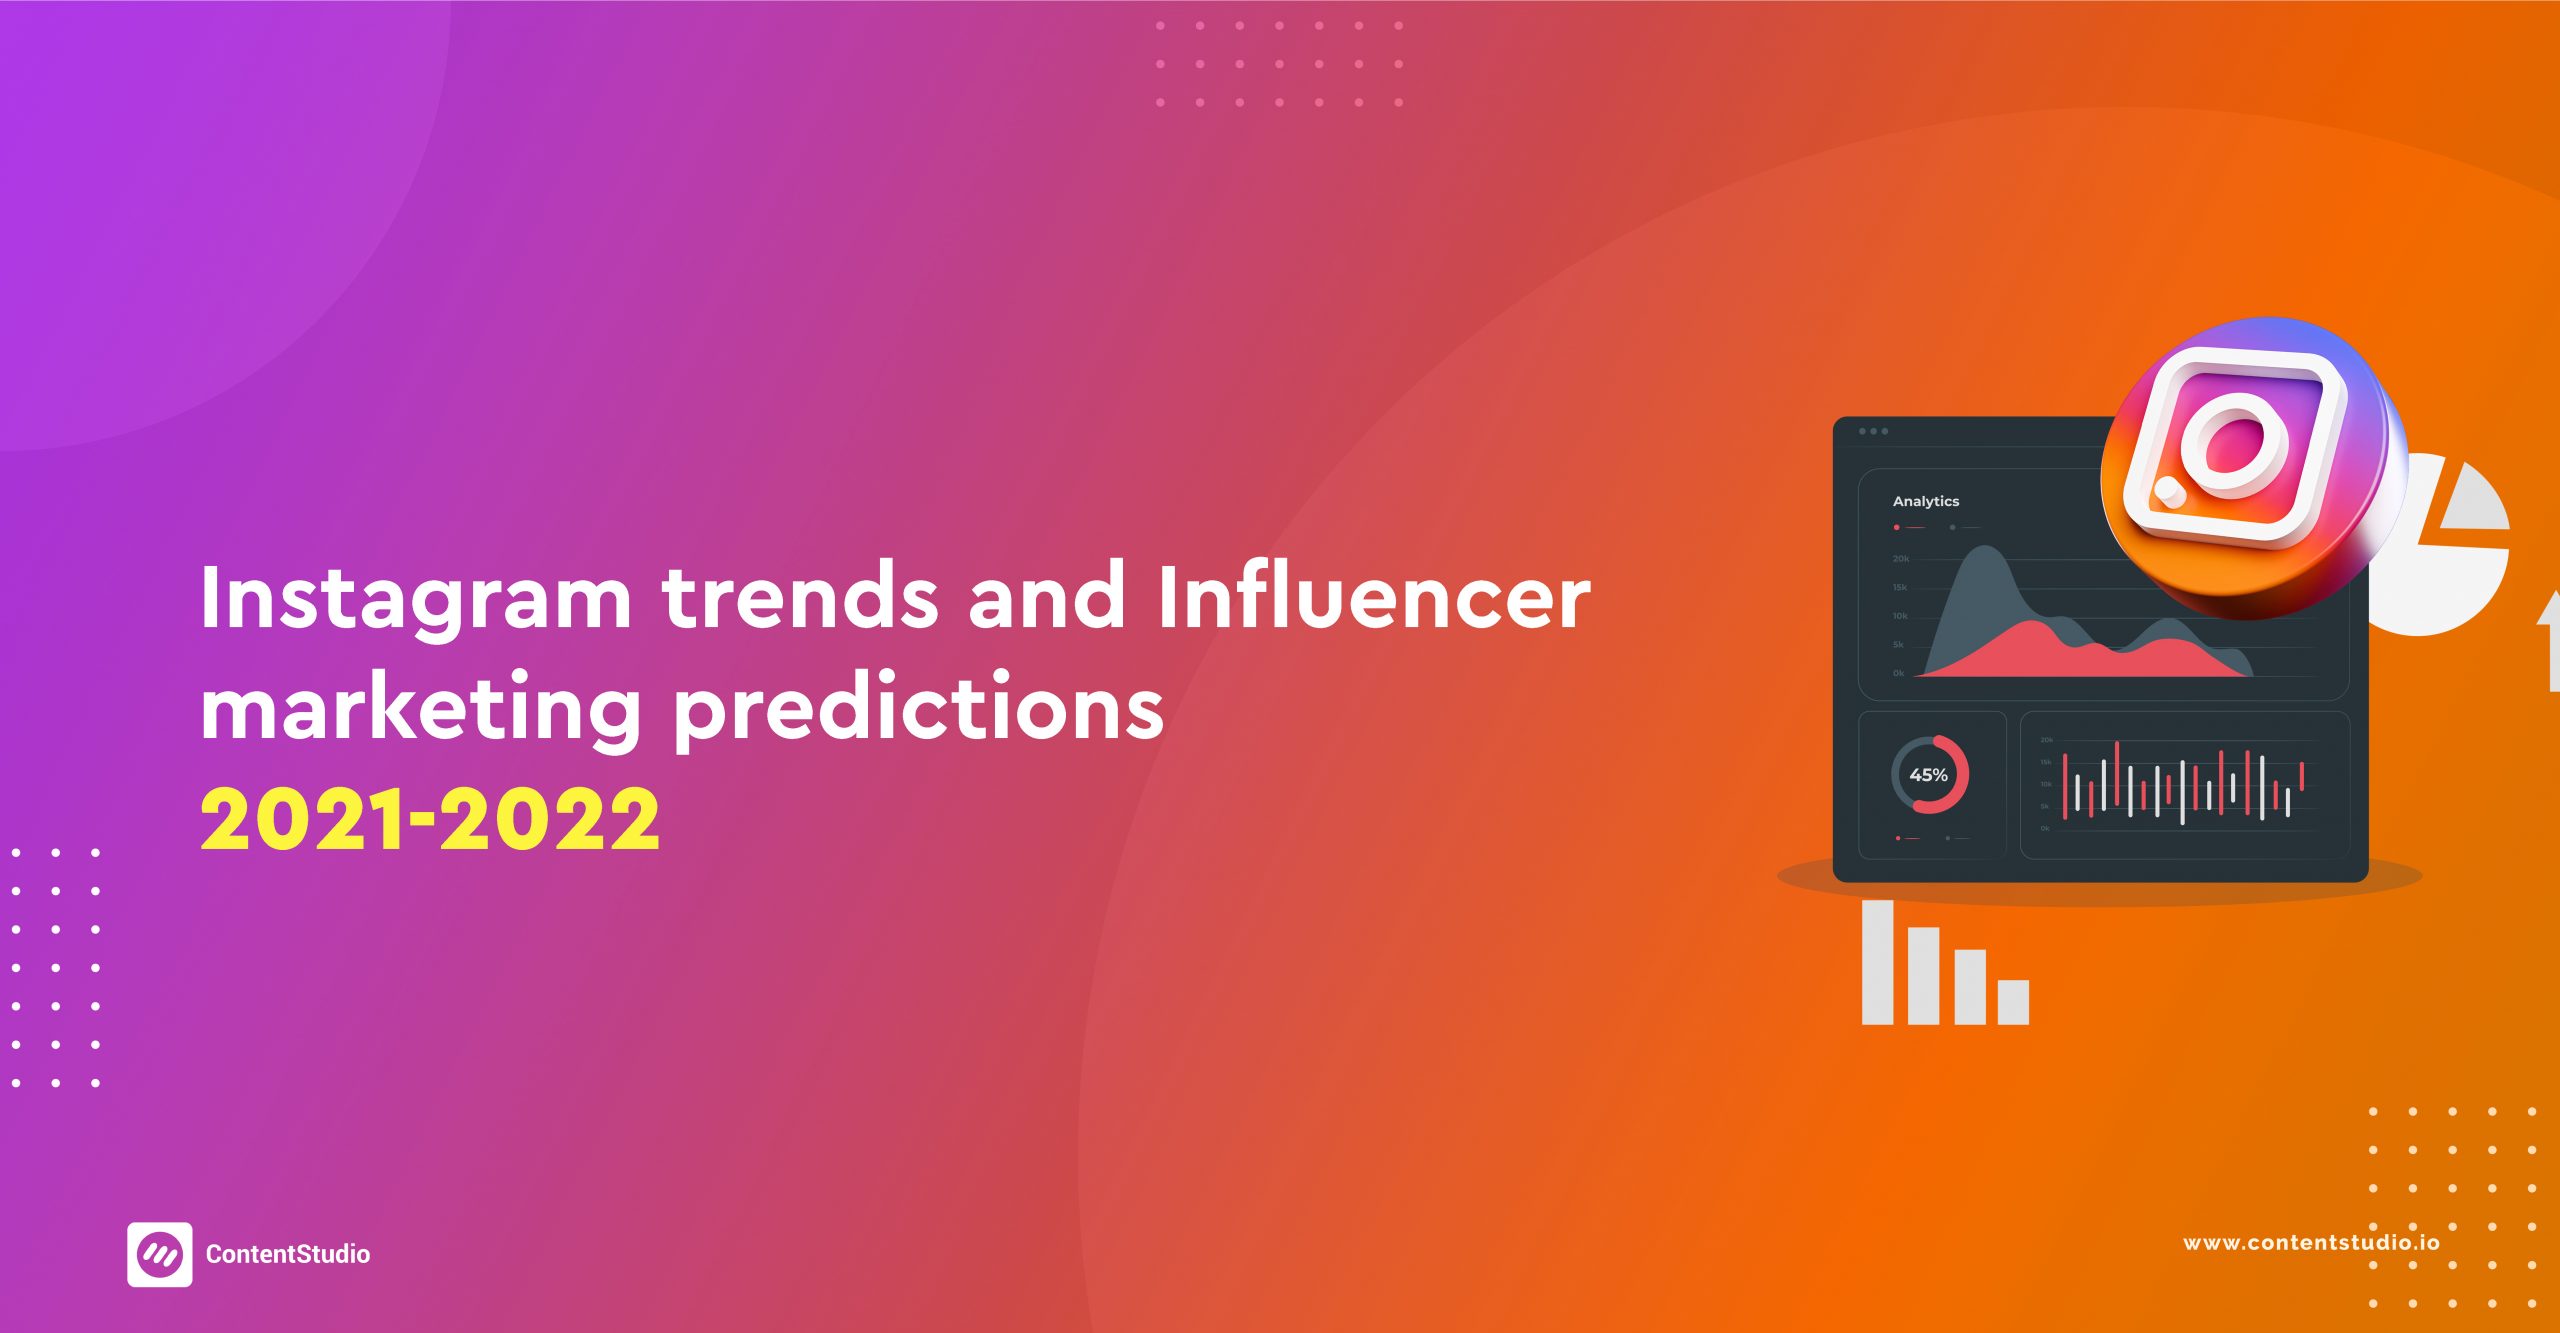 Instagram Trends and Influencer Marketing Predictions 2021-2022